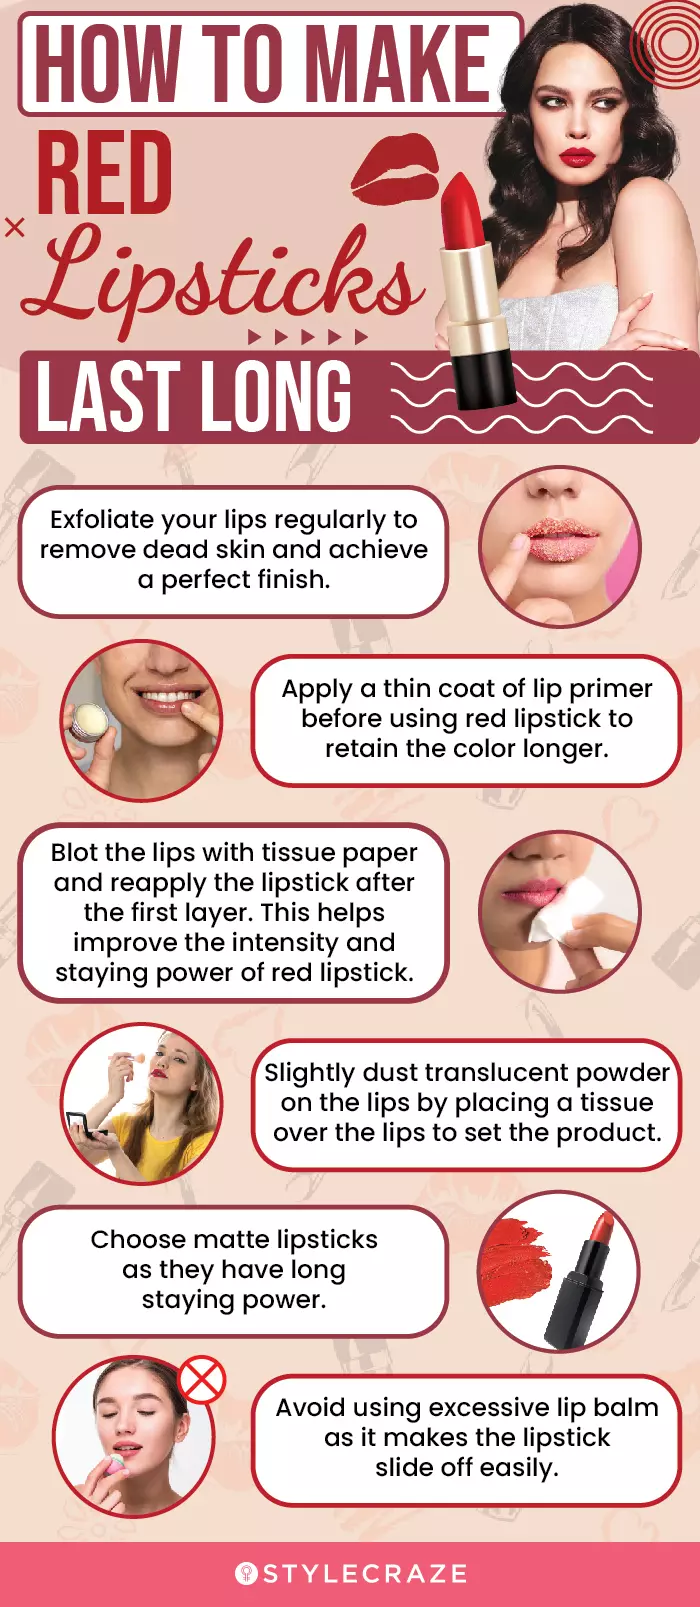 How To Make Red Lipsticks Last Long (infographic)